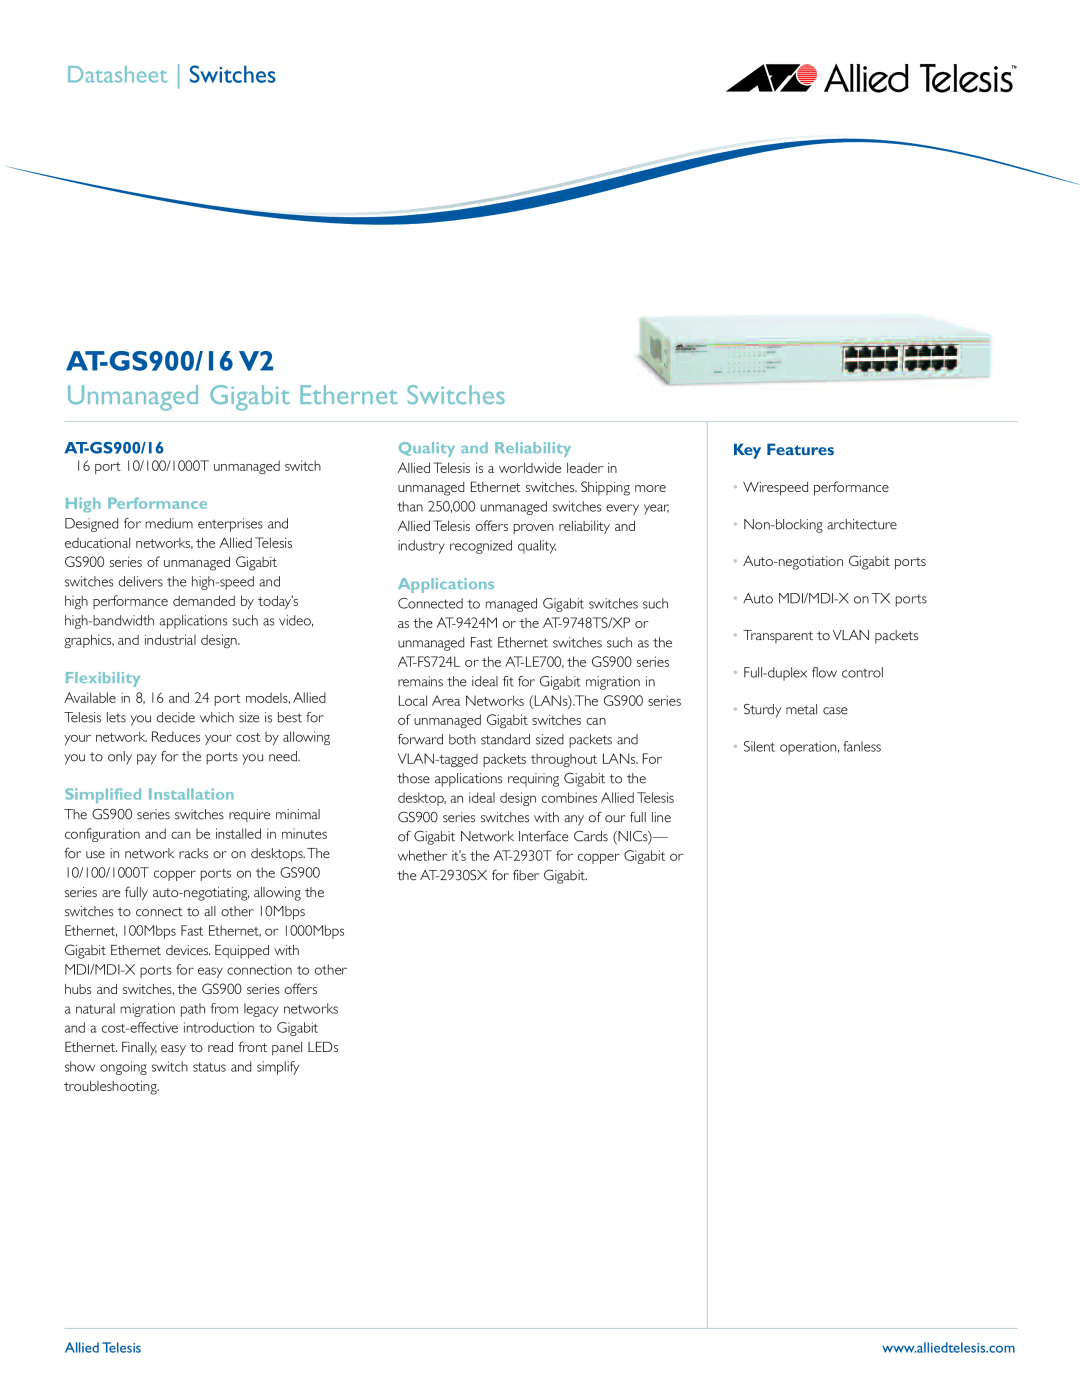 Allied Telesis AT-GS900/16 V2 manual Unmanaged Gigabit Ethernet Switches, High Performance, Flexibility, Applications 